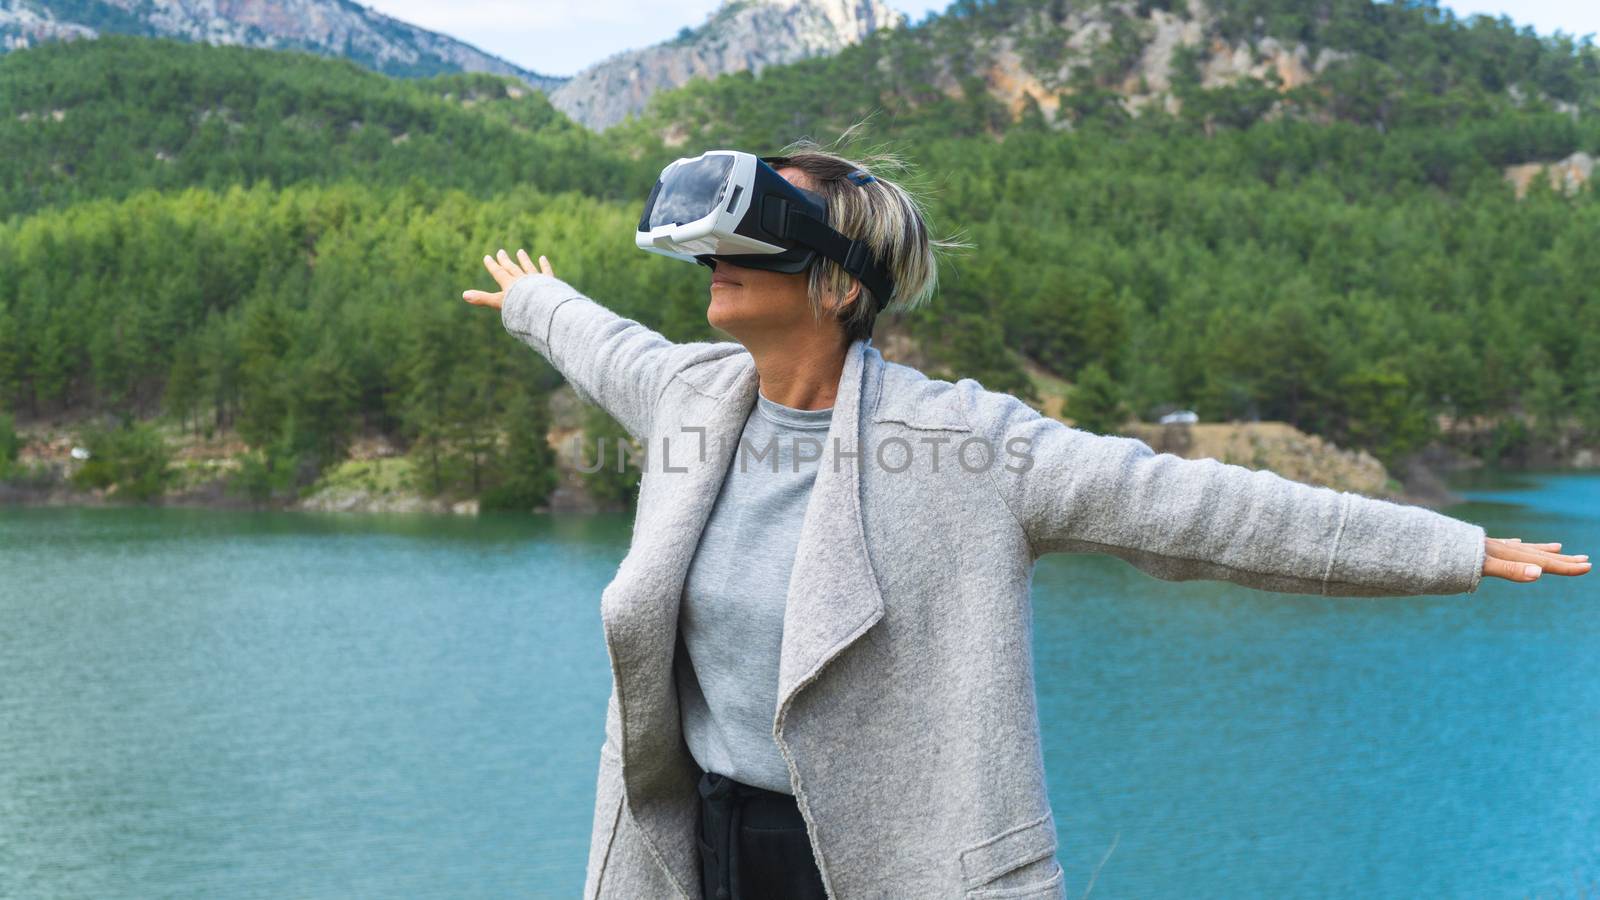 Adult female having fun with AR glasses on. Flying. Playing.Daytime.